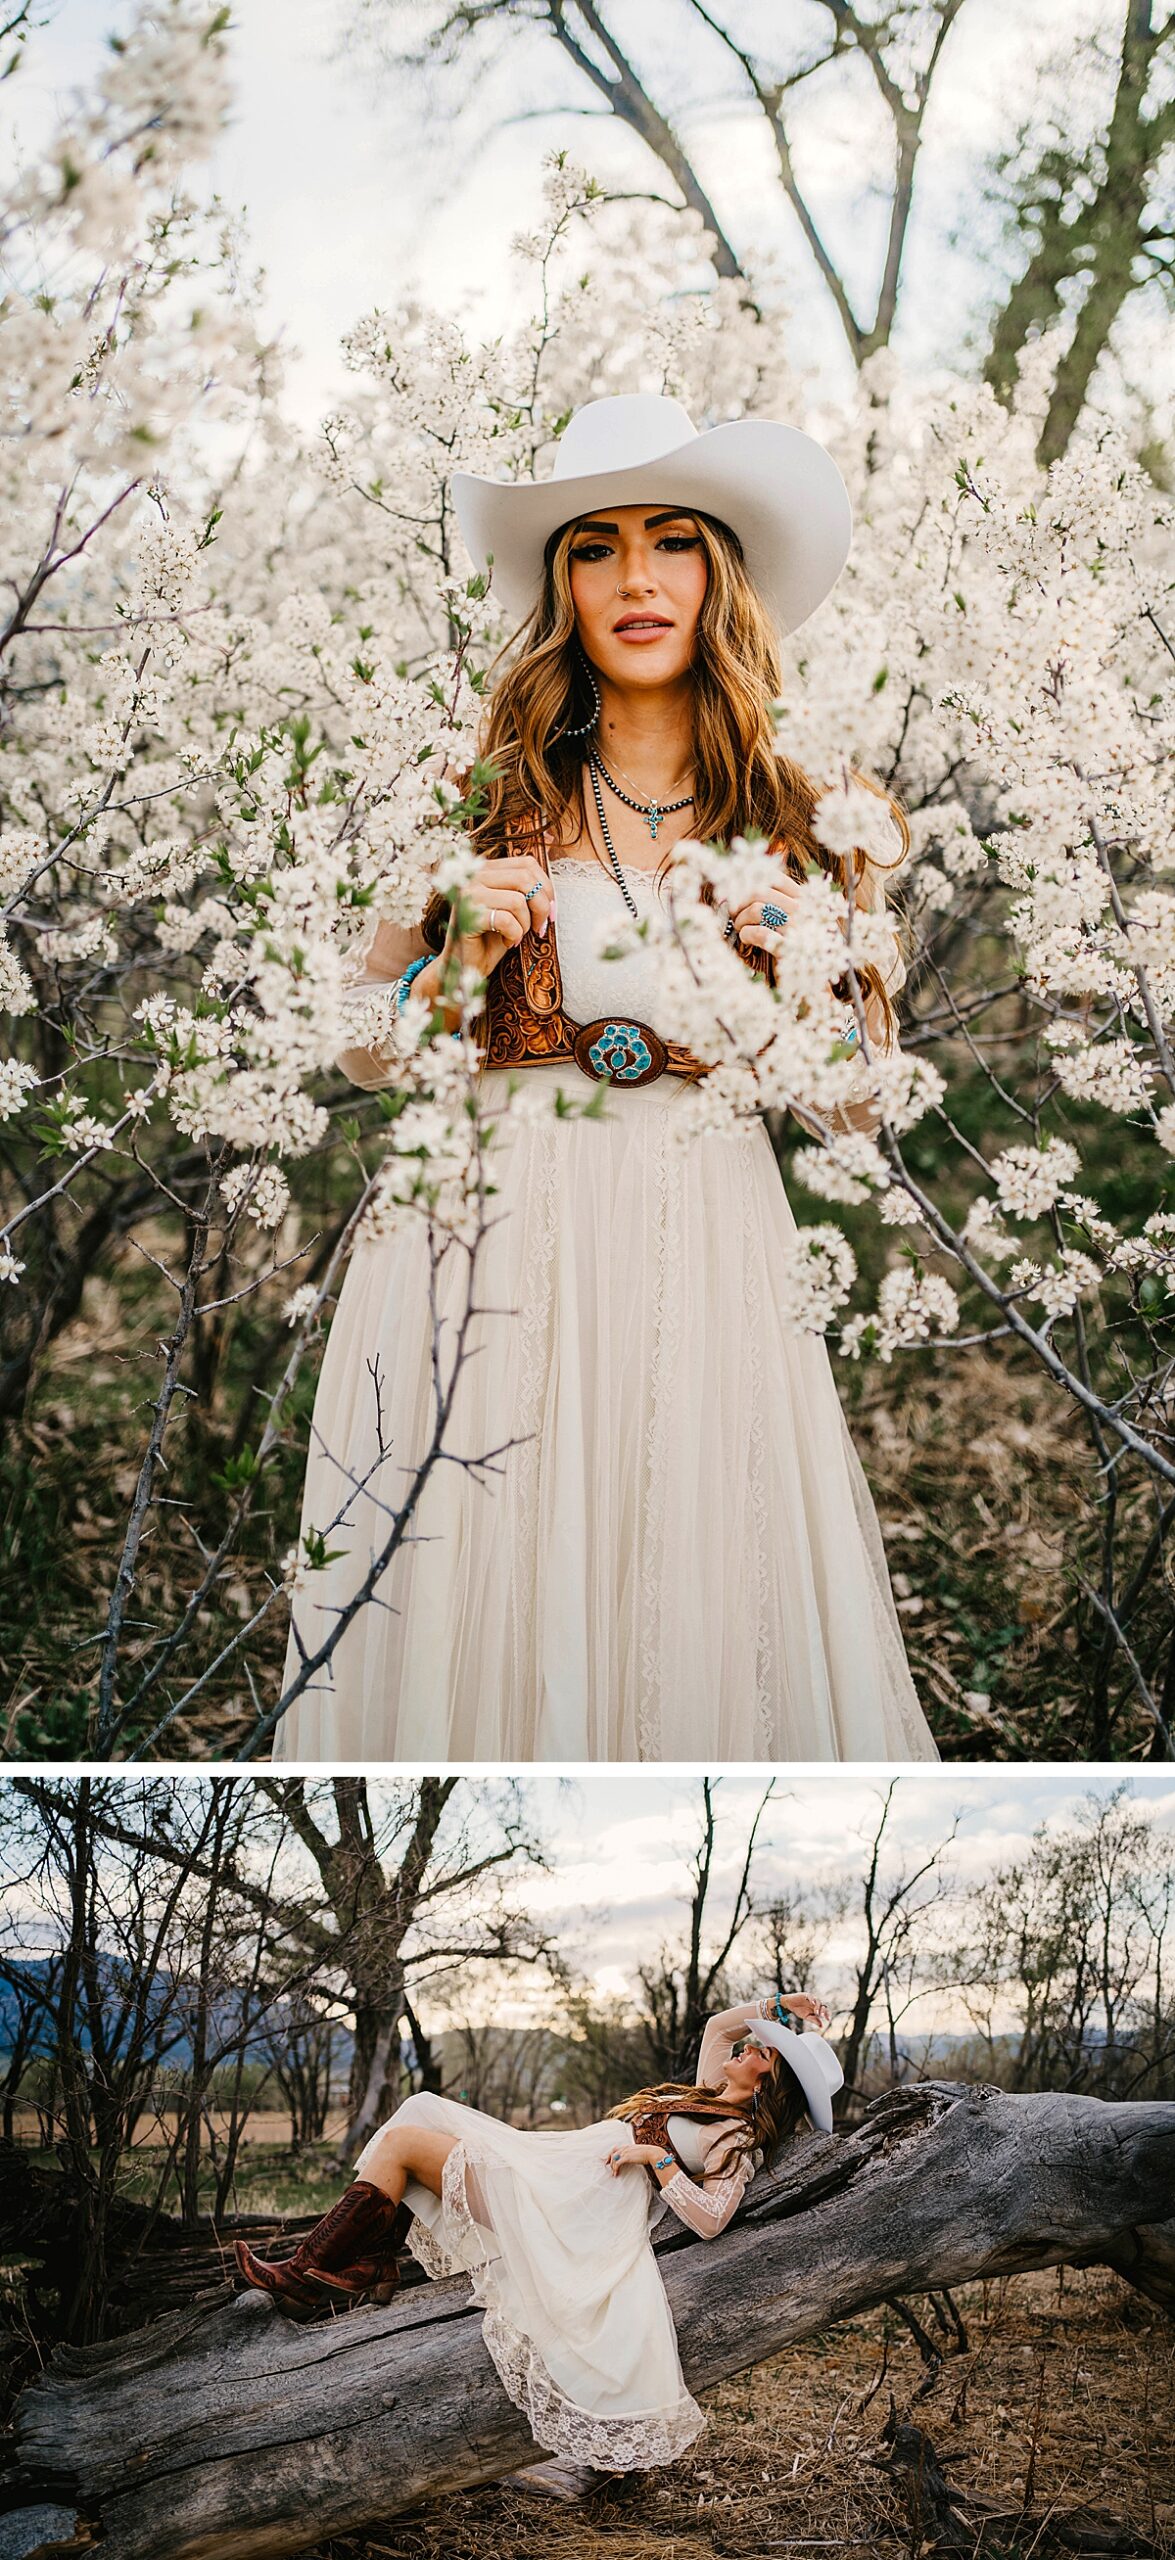 Western Fashion Influencer Buffalo Jane | High Pines Media | Wedding and Elopement Photographer | turquoise Tuesday, Denver Colorado, western outfit inspiration, cowgirl hat | via highpinesmedia.com 